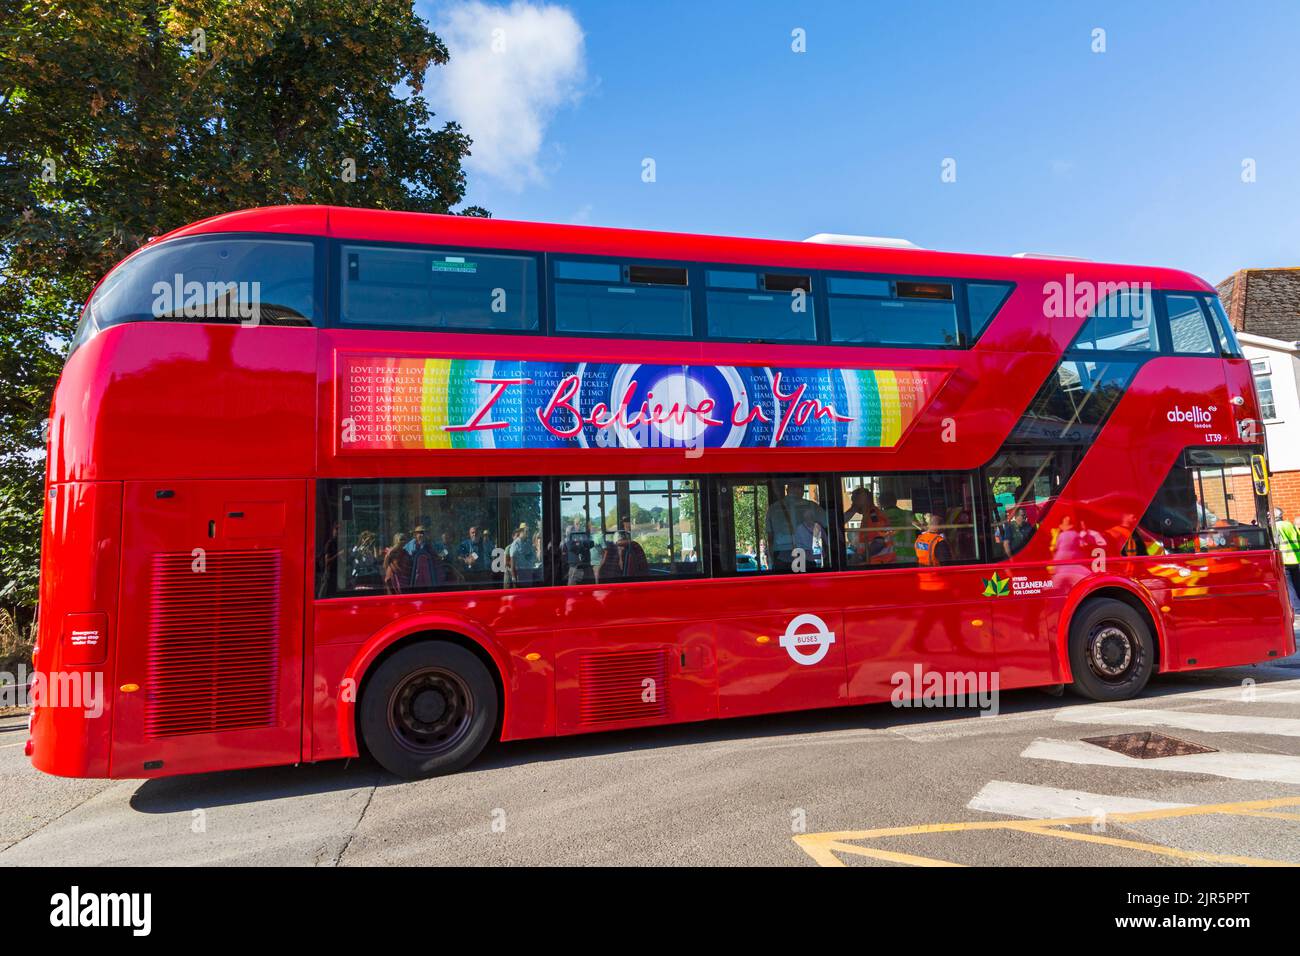 I believe in You message on side of Hybrid CleanerAir for London abellio LT39 red double decker bus Stock Photo